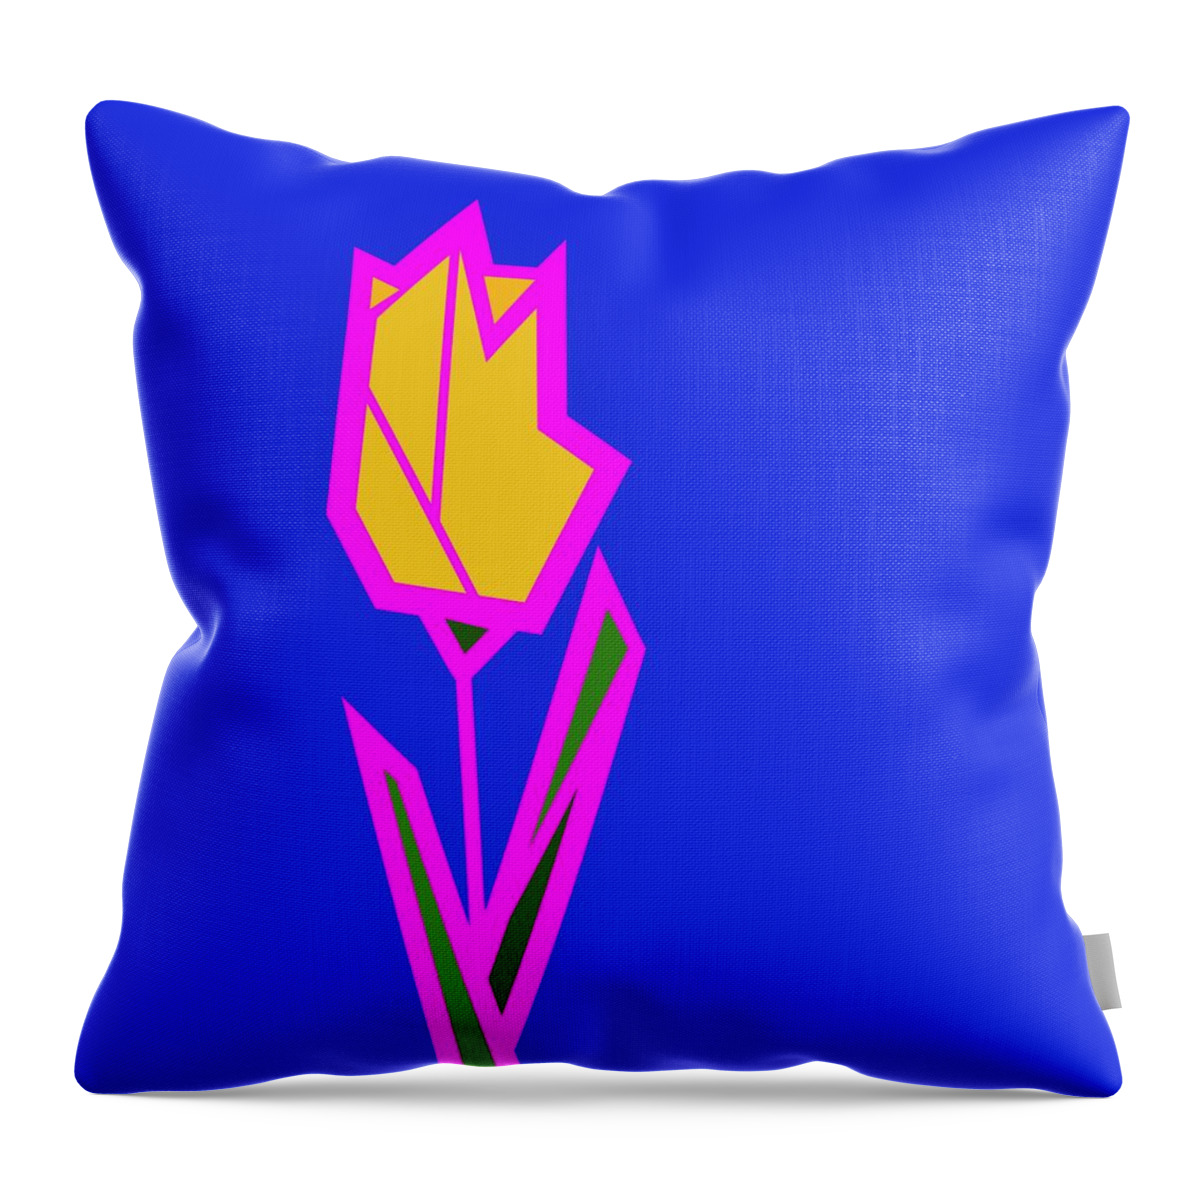 Tulip Throw Pillow featuring the digital art Yellow tulip by Fatline Graphic Art